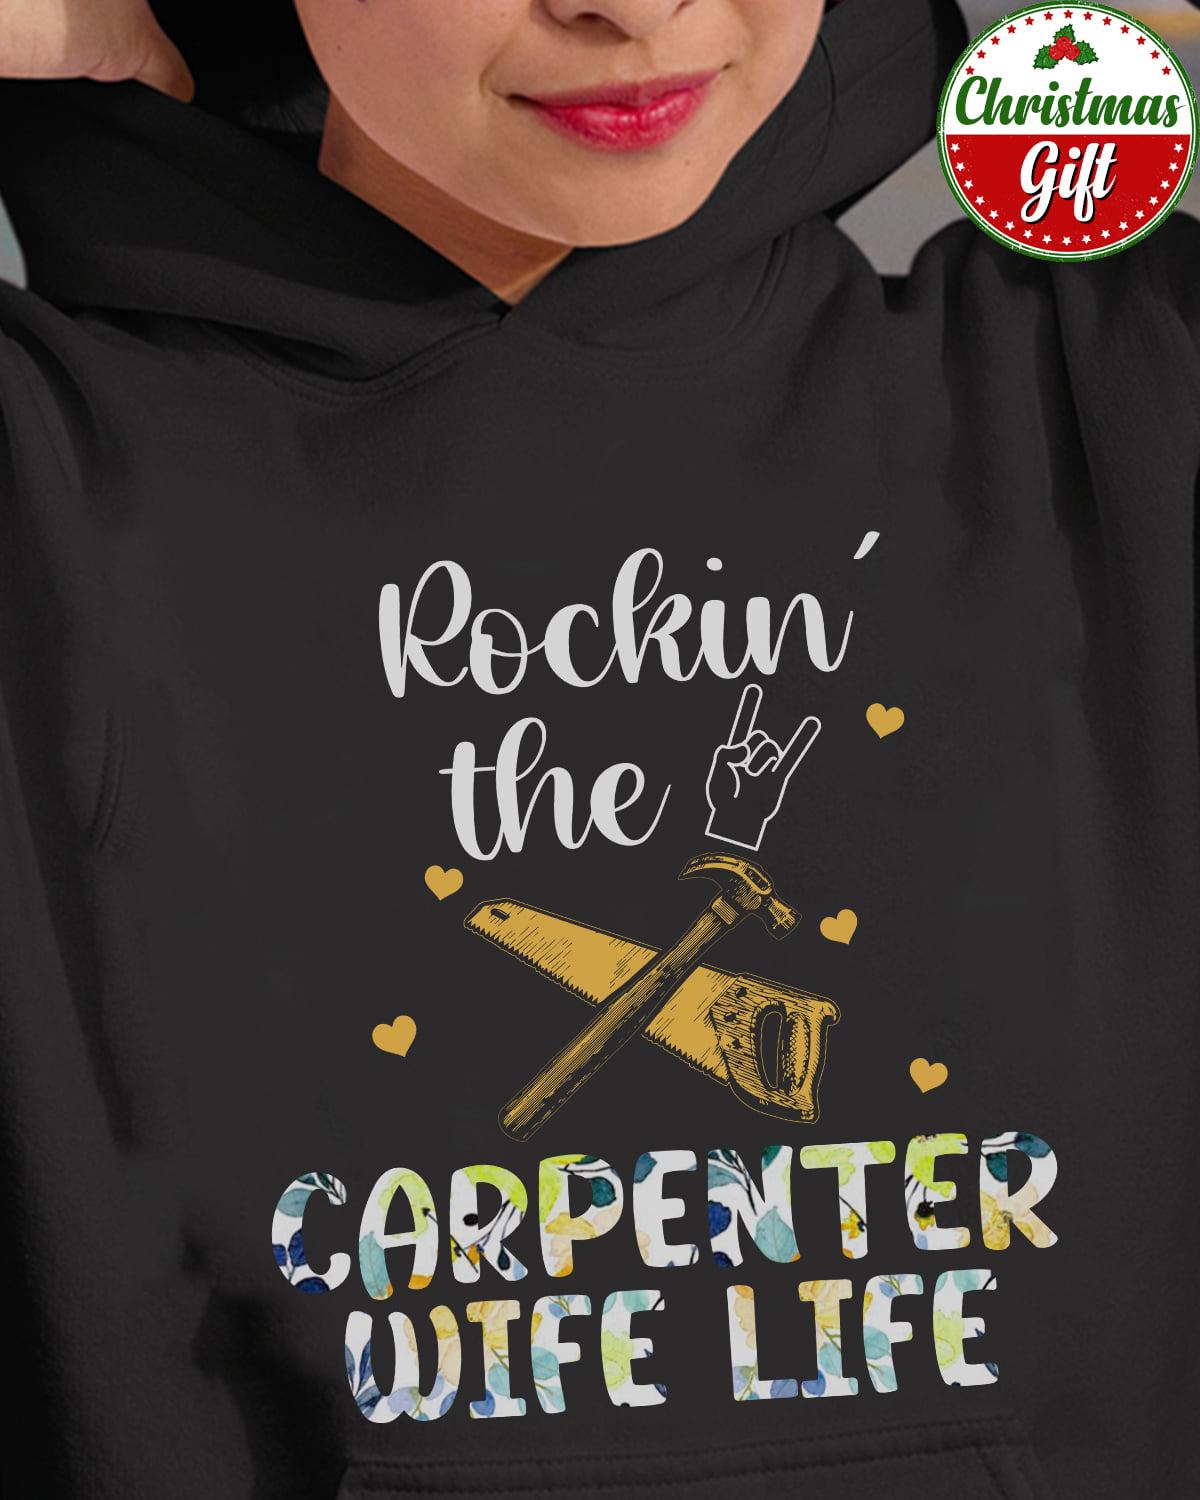 Rocking the carpenter wife life - Carpenter the job, wife and husband